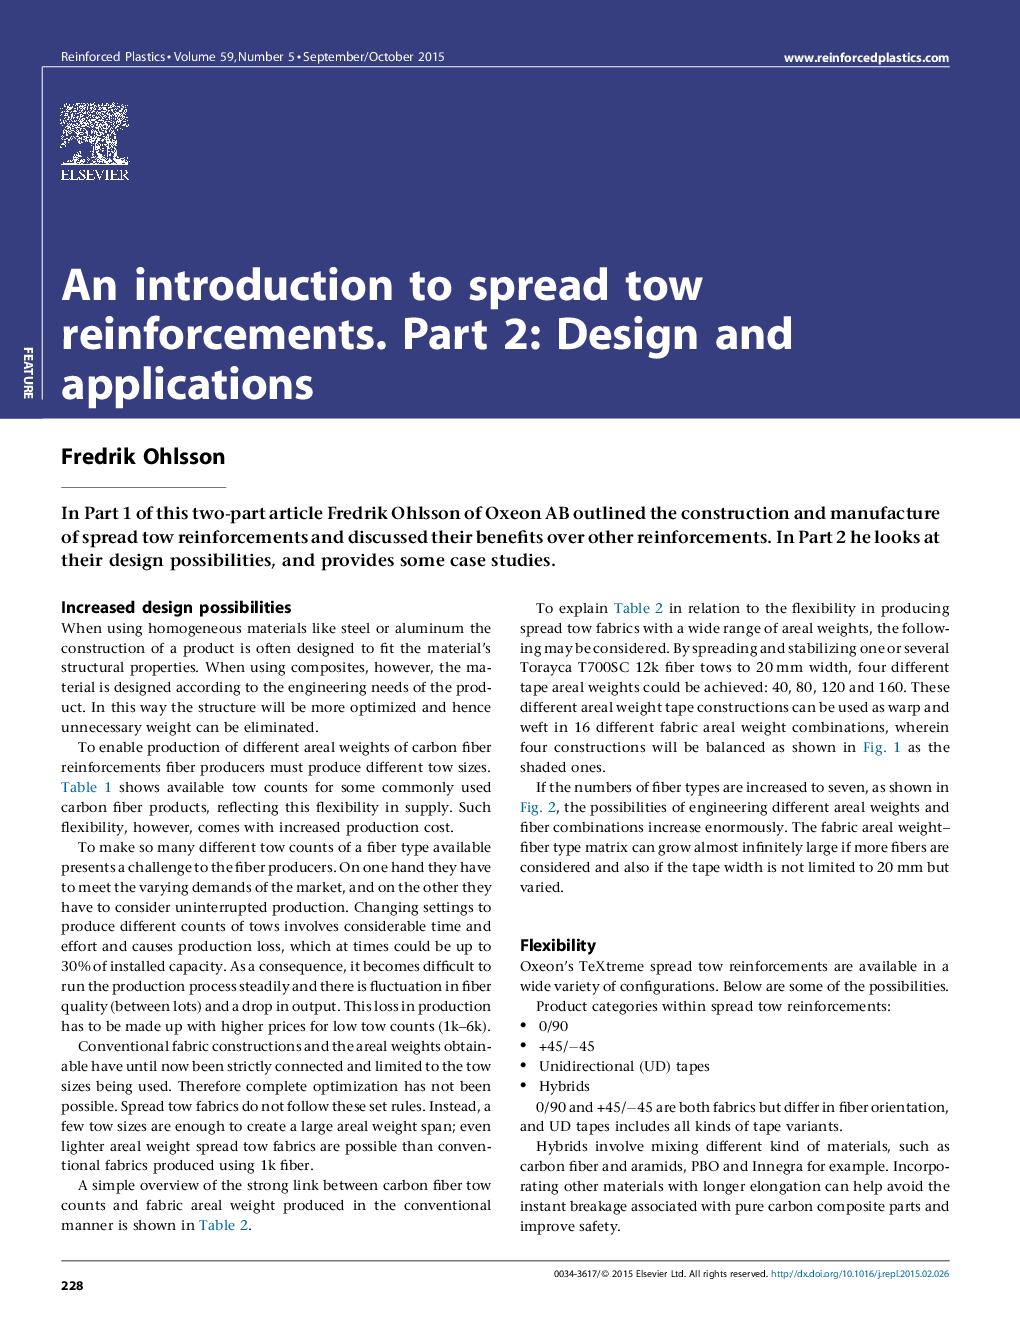 An introduction to spread tow reinforcements. Part 2: Design and applications